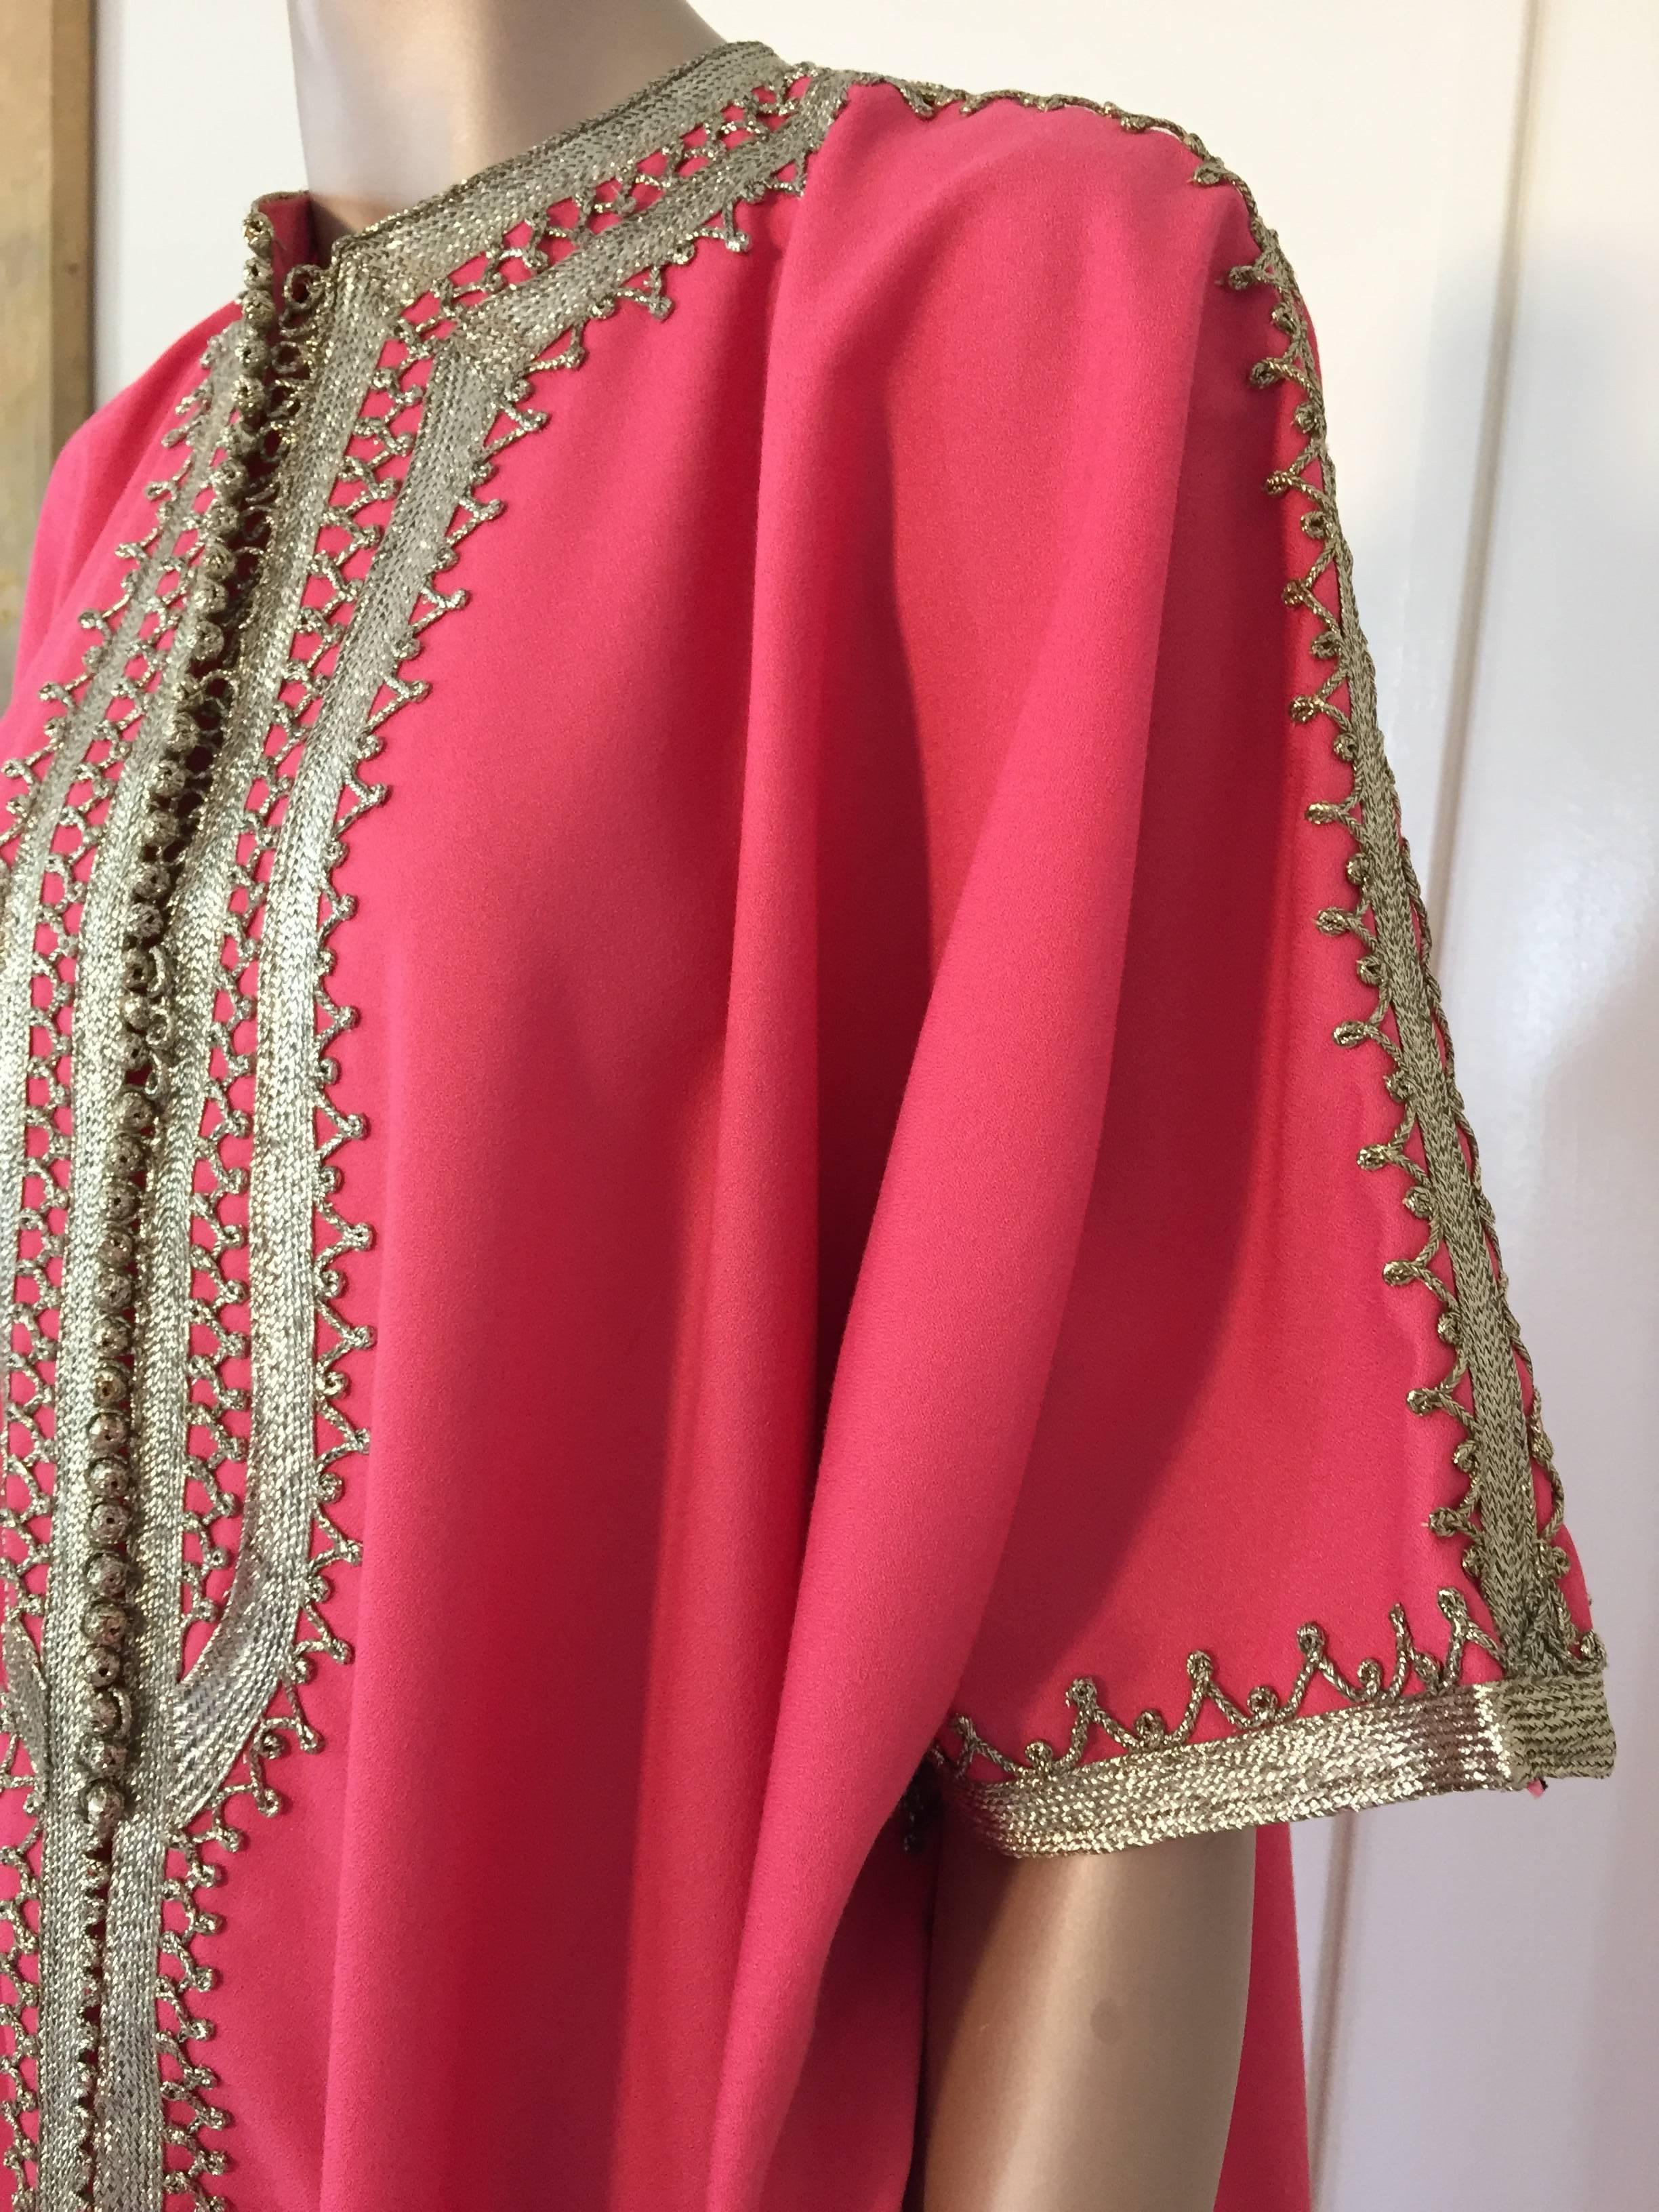 Vintage Moroccan Kaftan Hot Pink Color with Silver Trim caftan 1970 In Good Condition For Sale In North Hollywood, CA